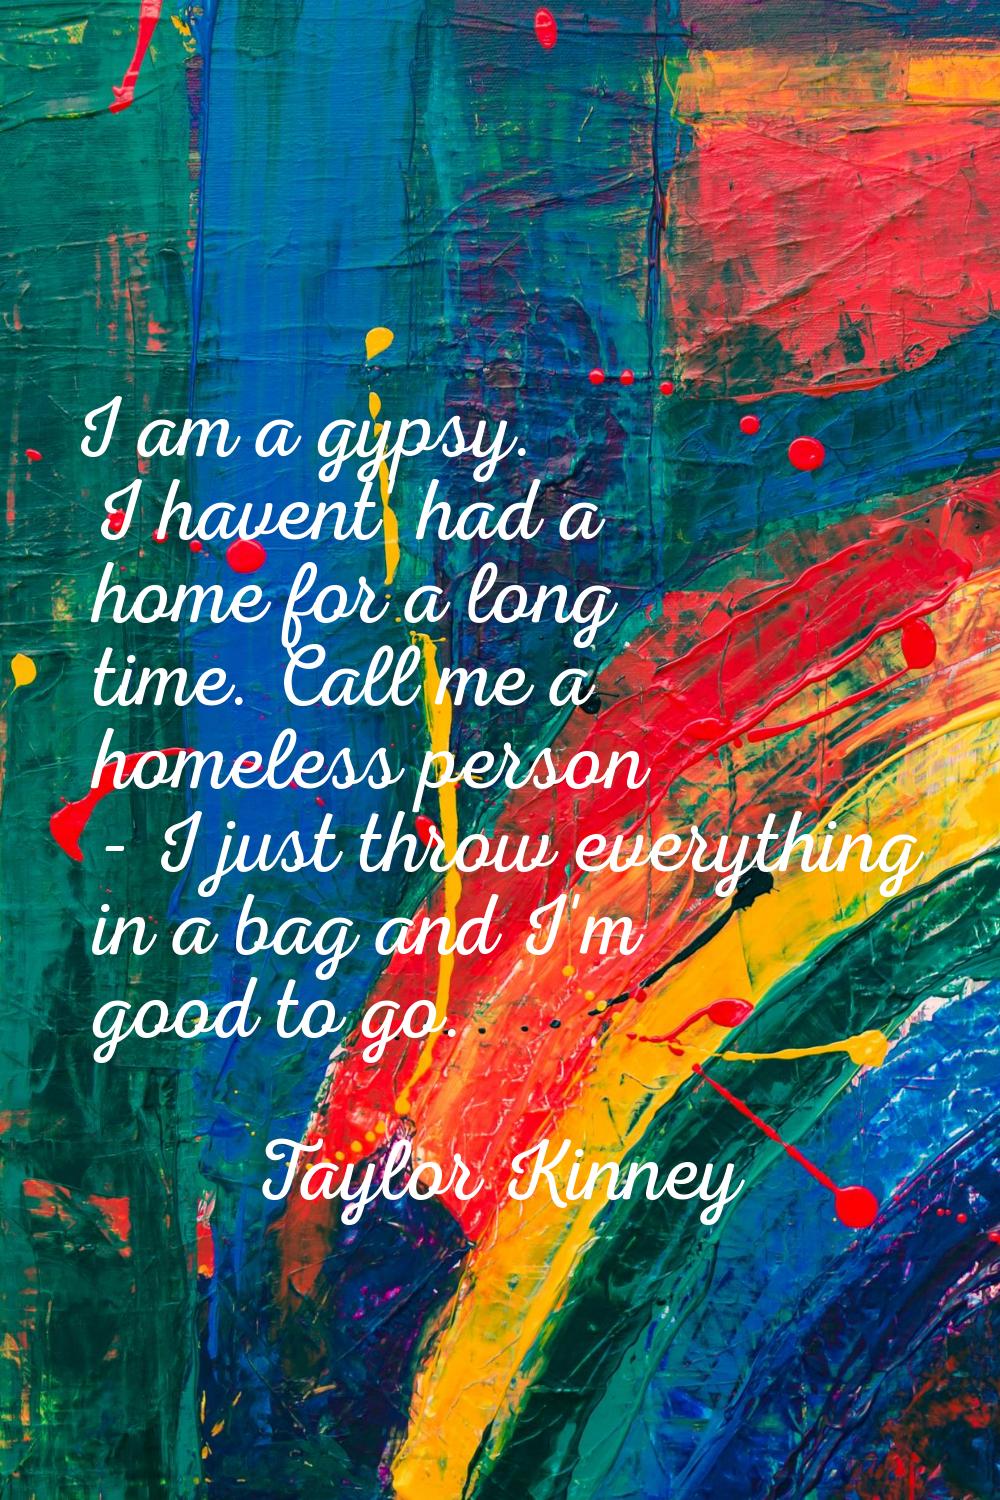 I am a gypsy. I havent' had a home for a long time. Call me a homeless person - I just throw everyt